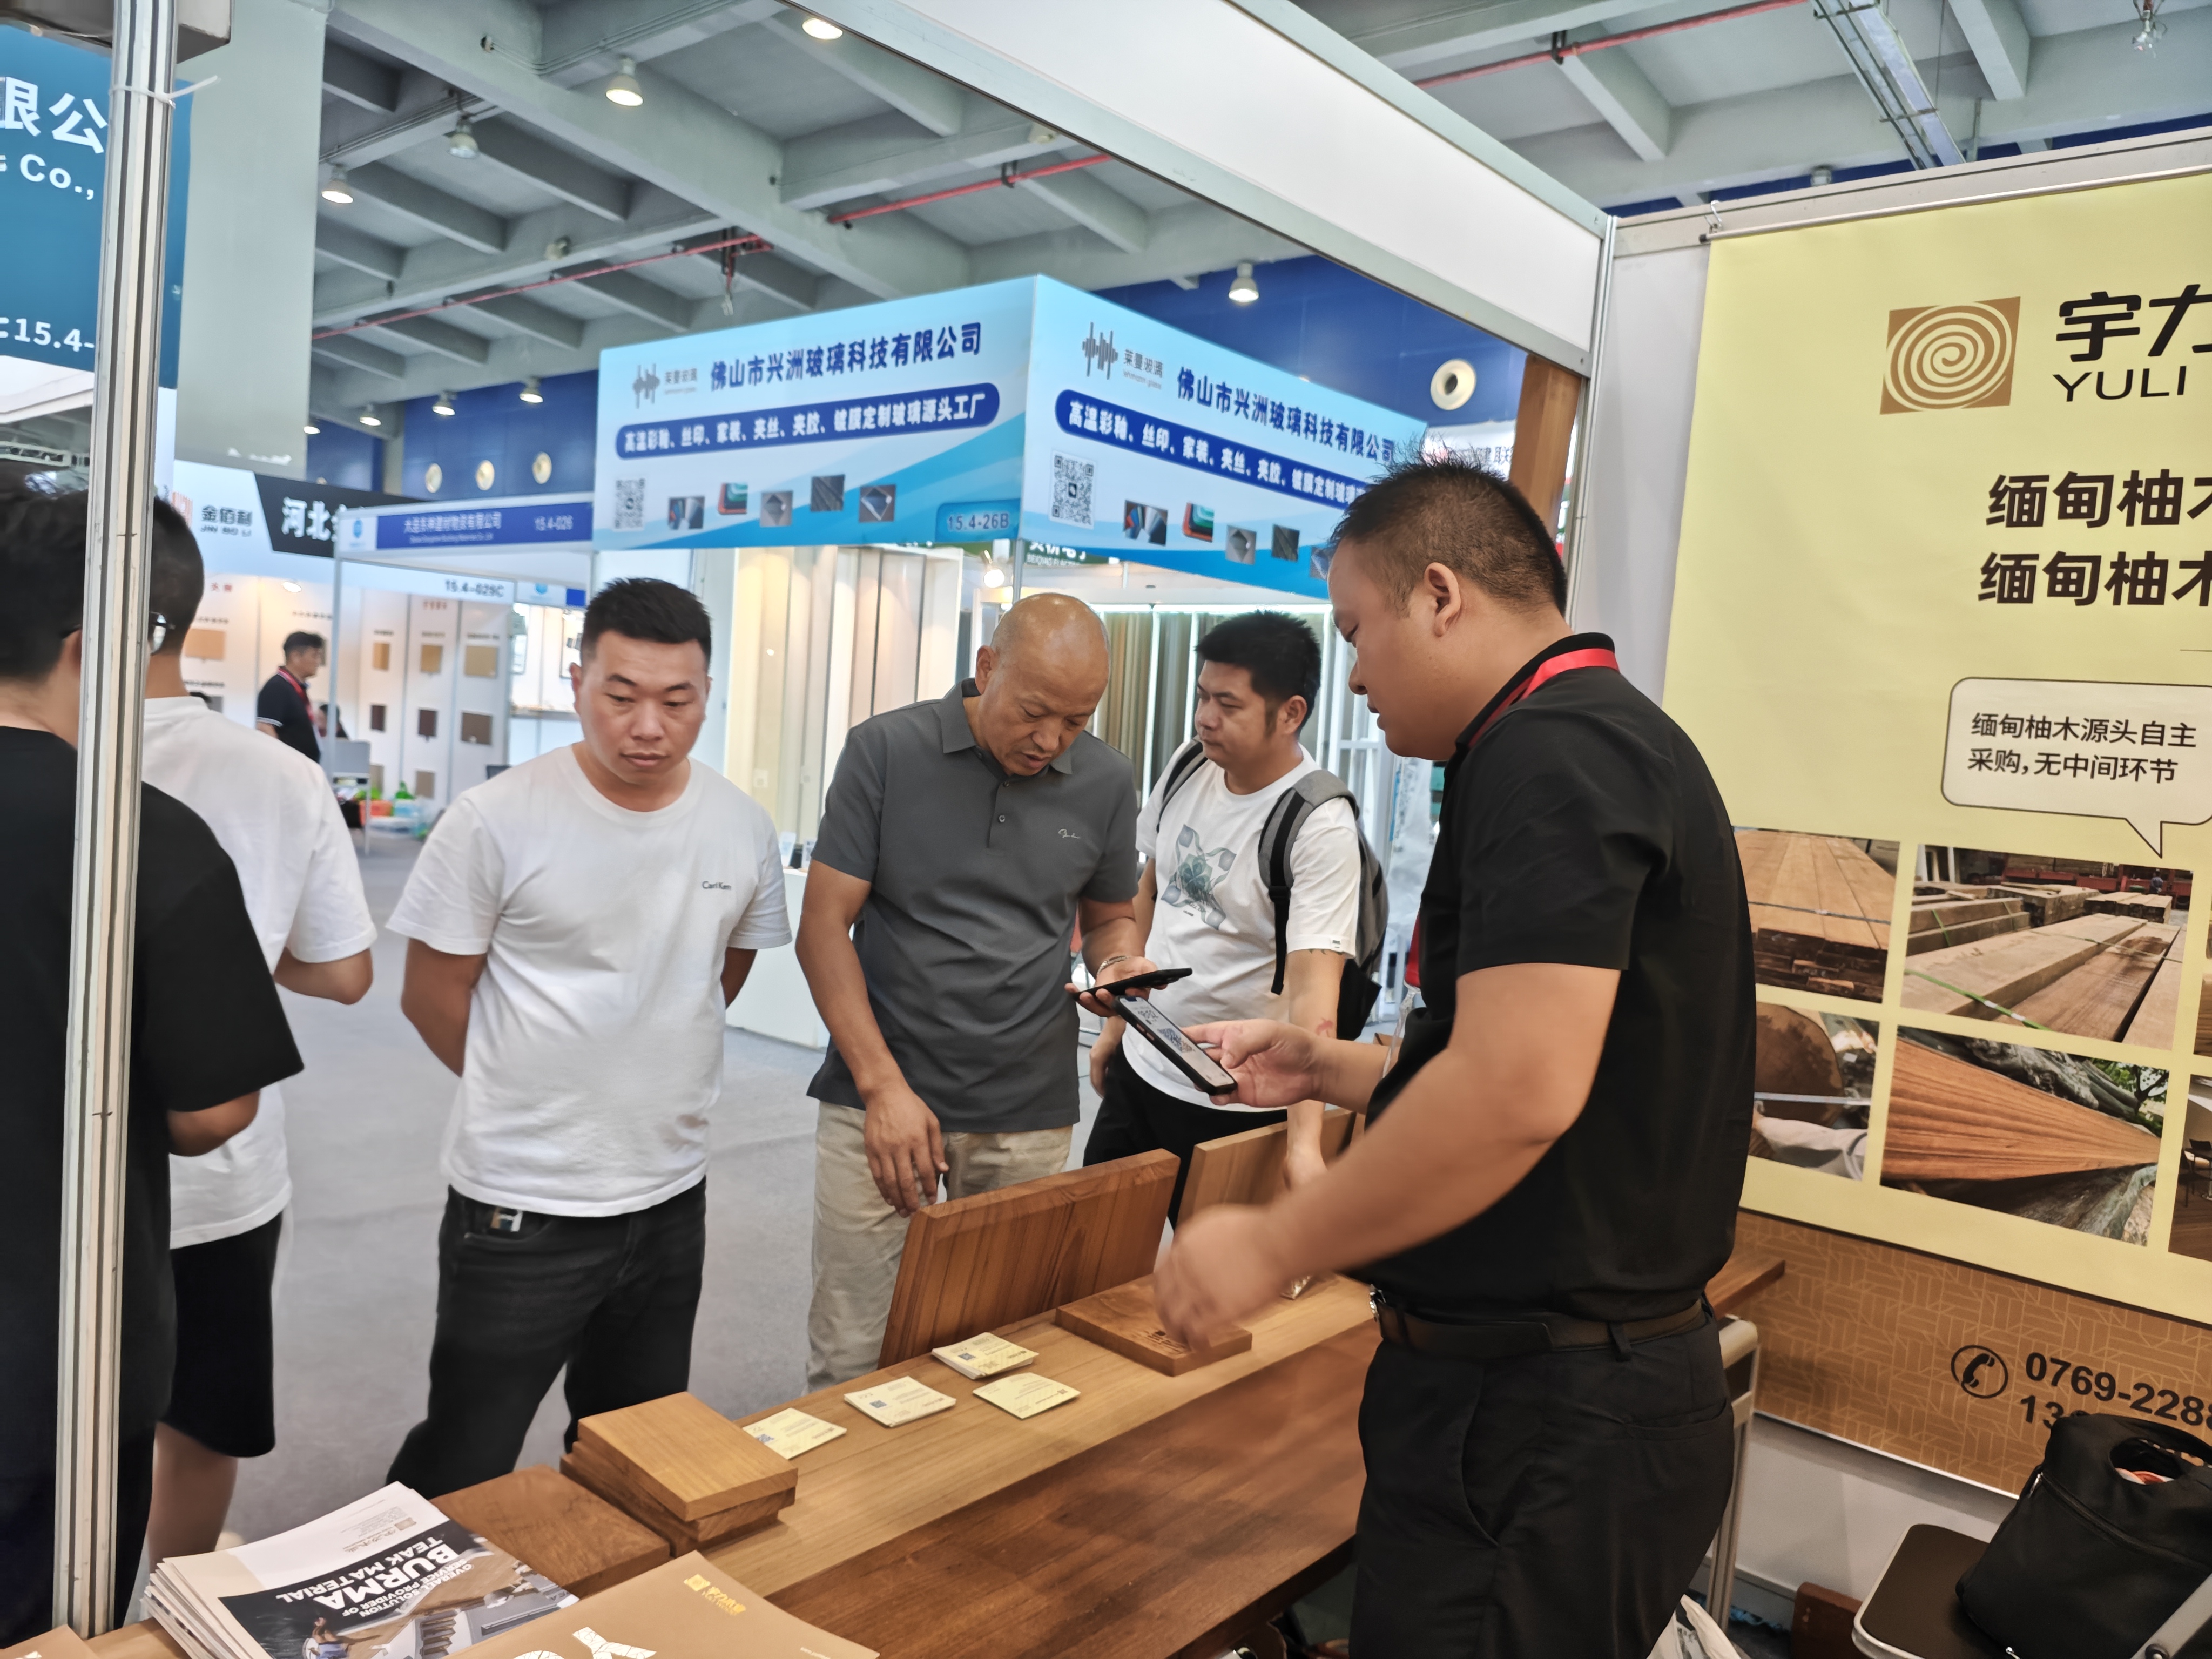 Teak Boutique and Brand Charm - Yuli Brings the King of Teak to the 26th Guangzhou Construction Expo